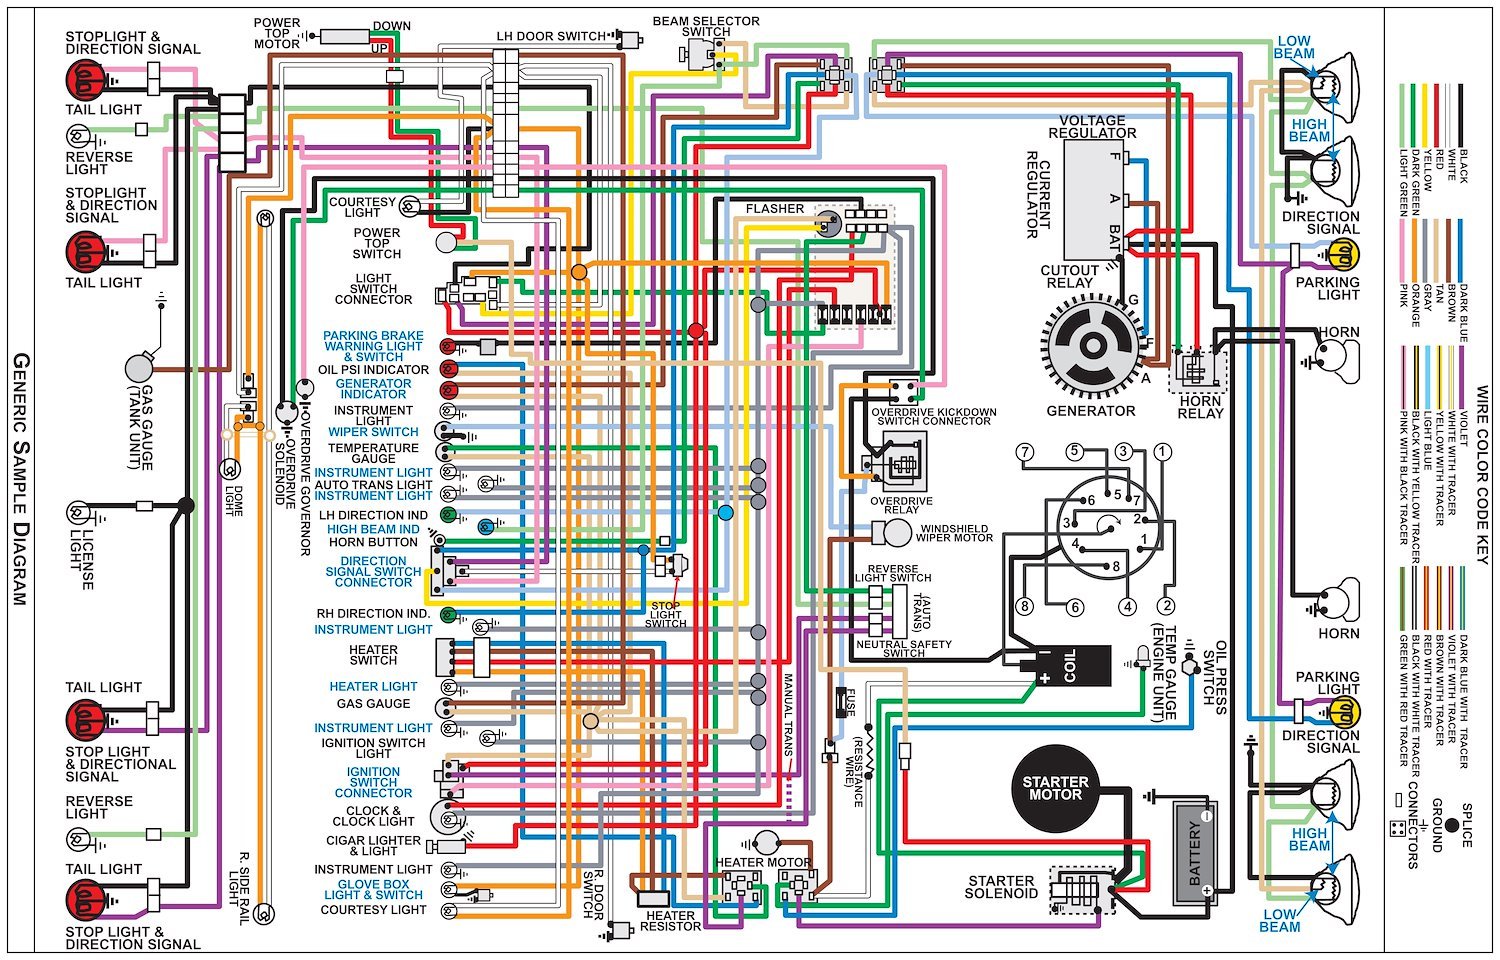 Wiring Diagram for 1970 Chevy Belair, Biscayne, Caprice,